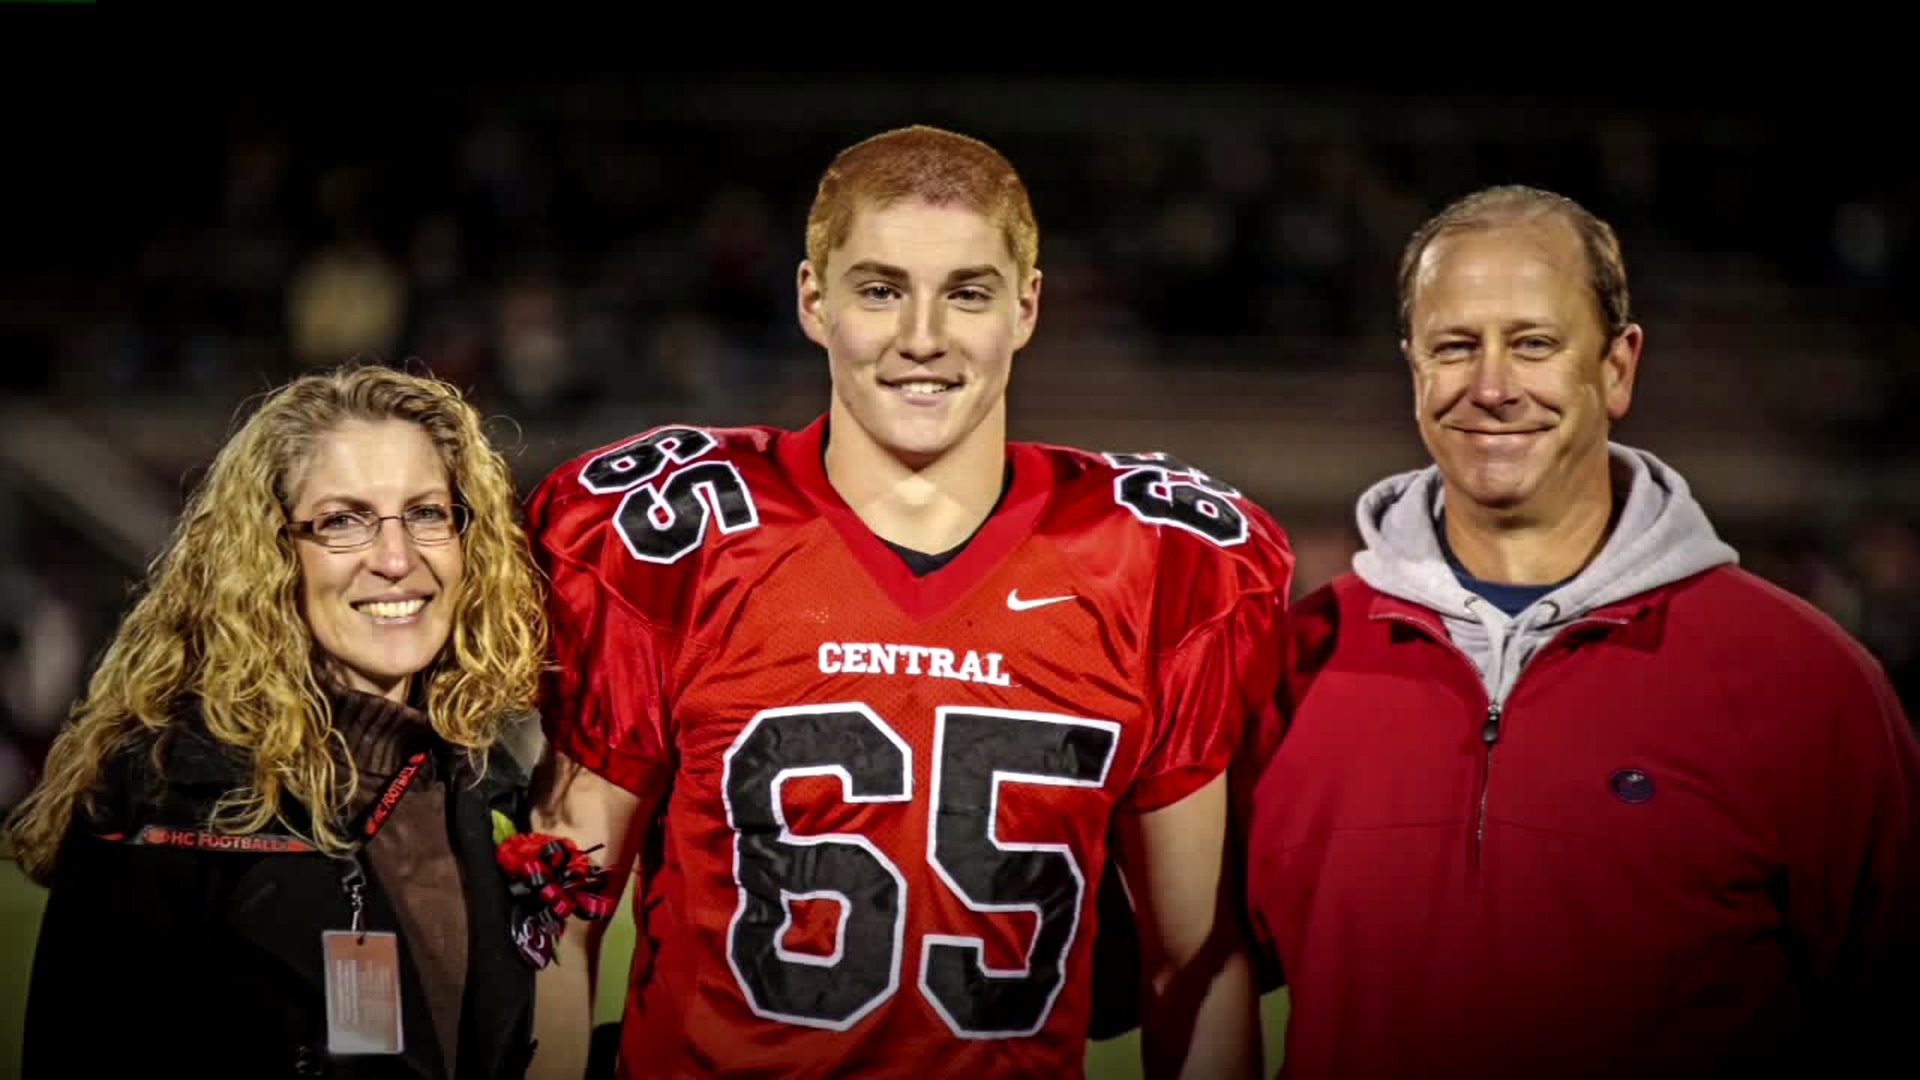 Settlement Reached Between Family and Fraternity in PSU Fraternity Death